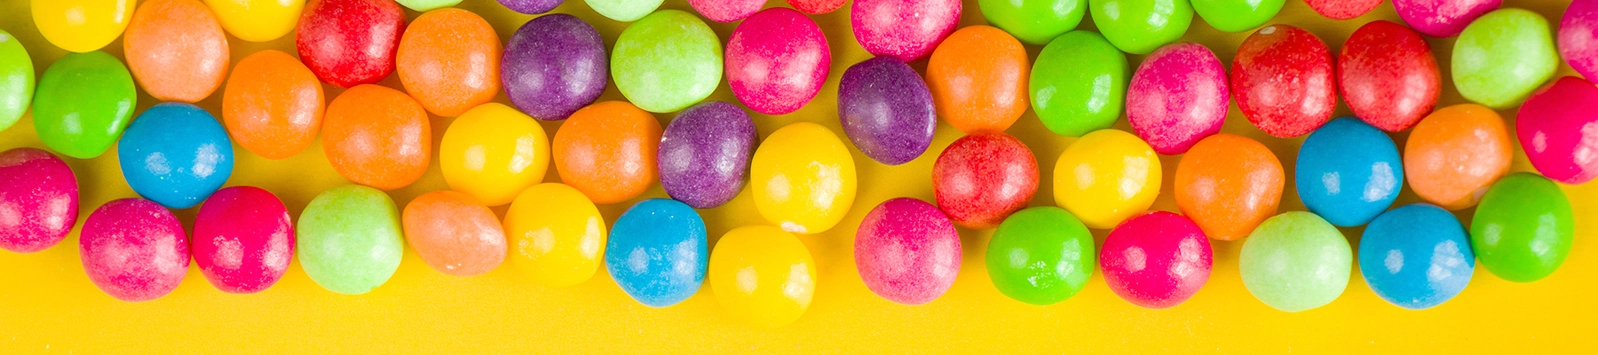 colorful fruit candy on yellow background